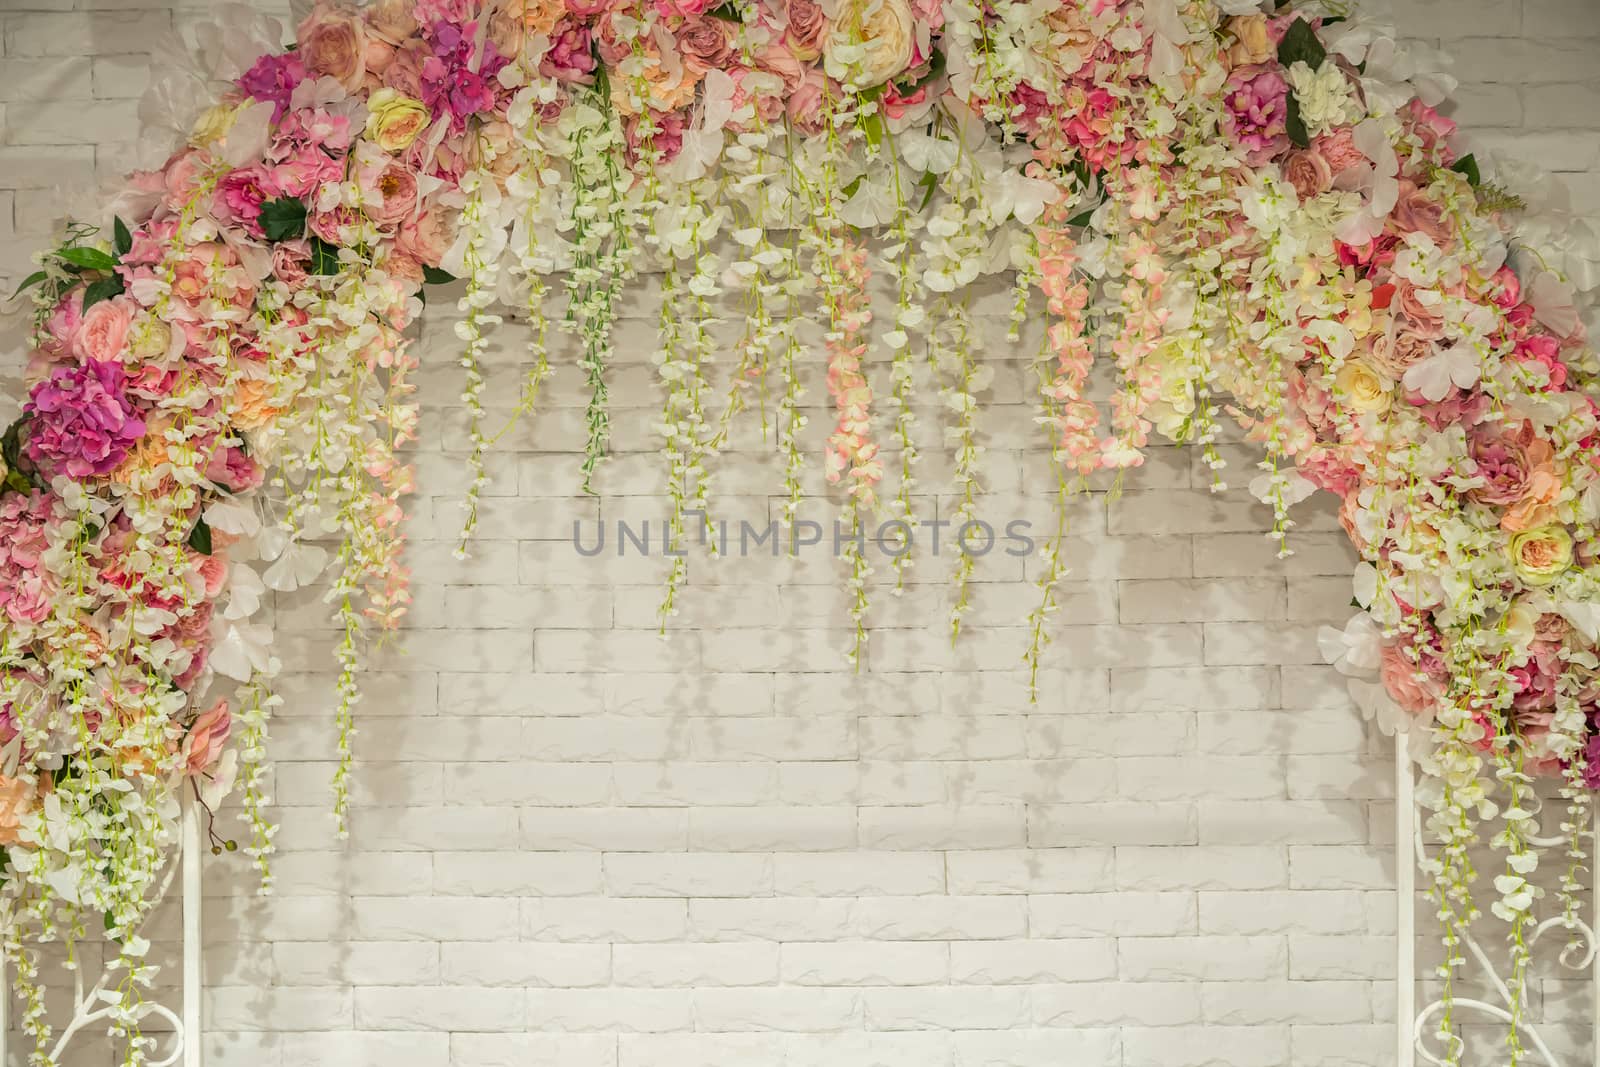 Wedding arch with flowers for the wedding ceremony. Wedding flower background